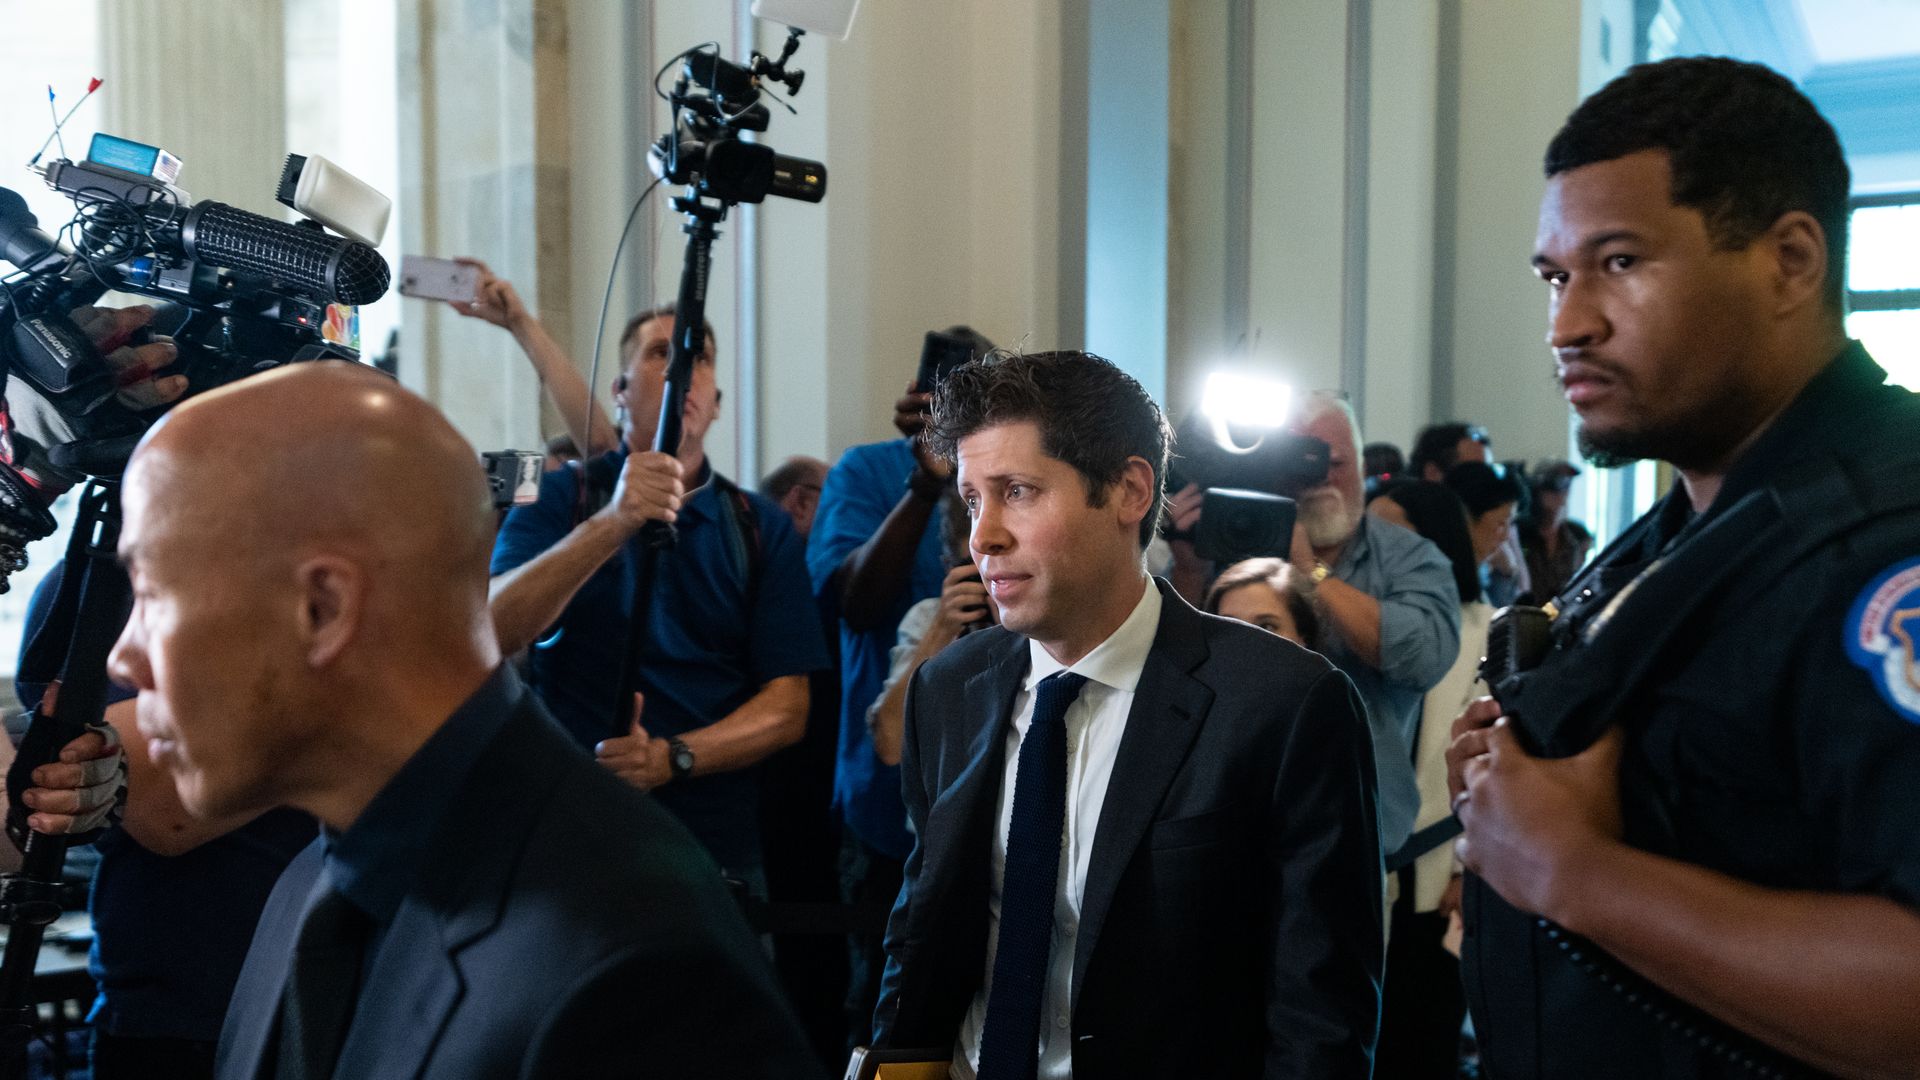 OpenAI CEO Sam Altman flanked by press and bodyguards on Capitol Hill